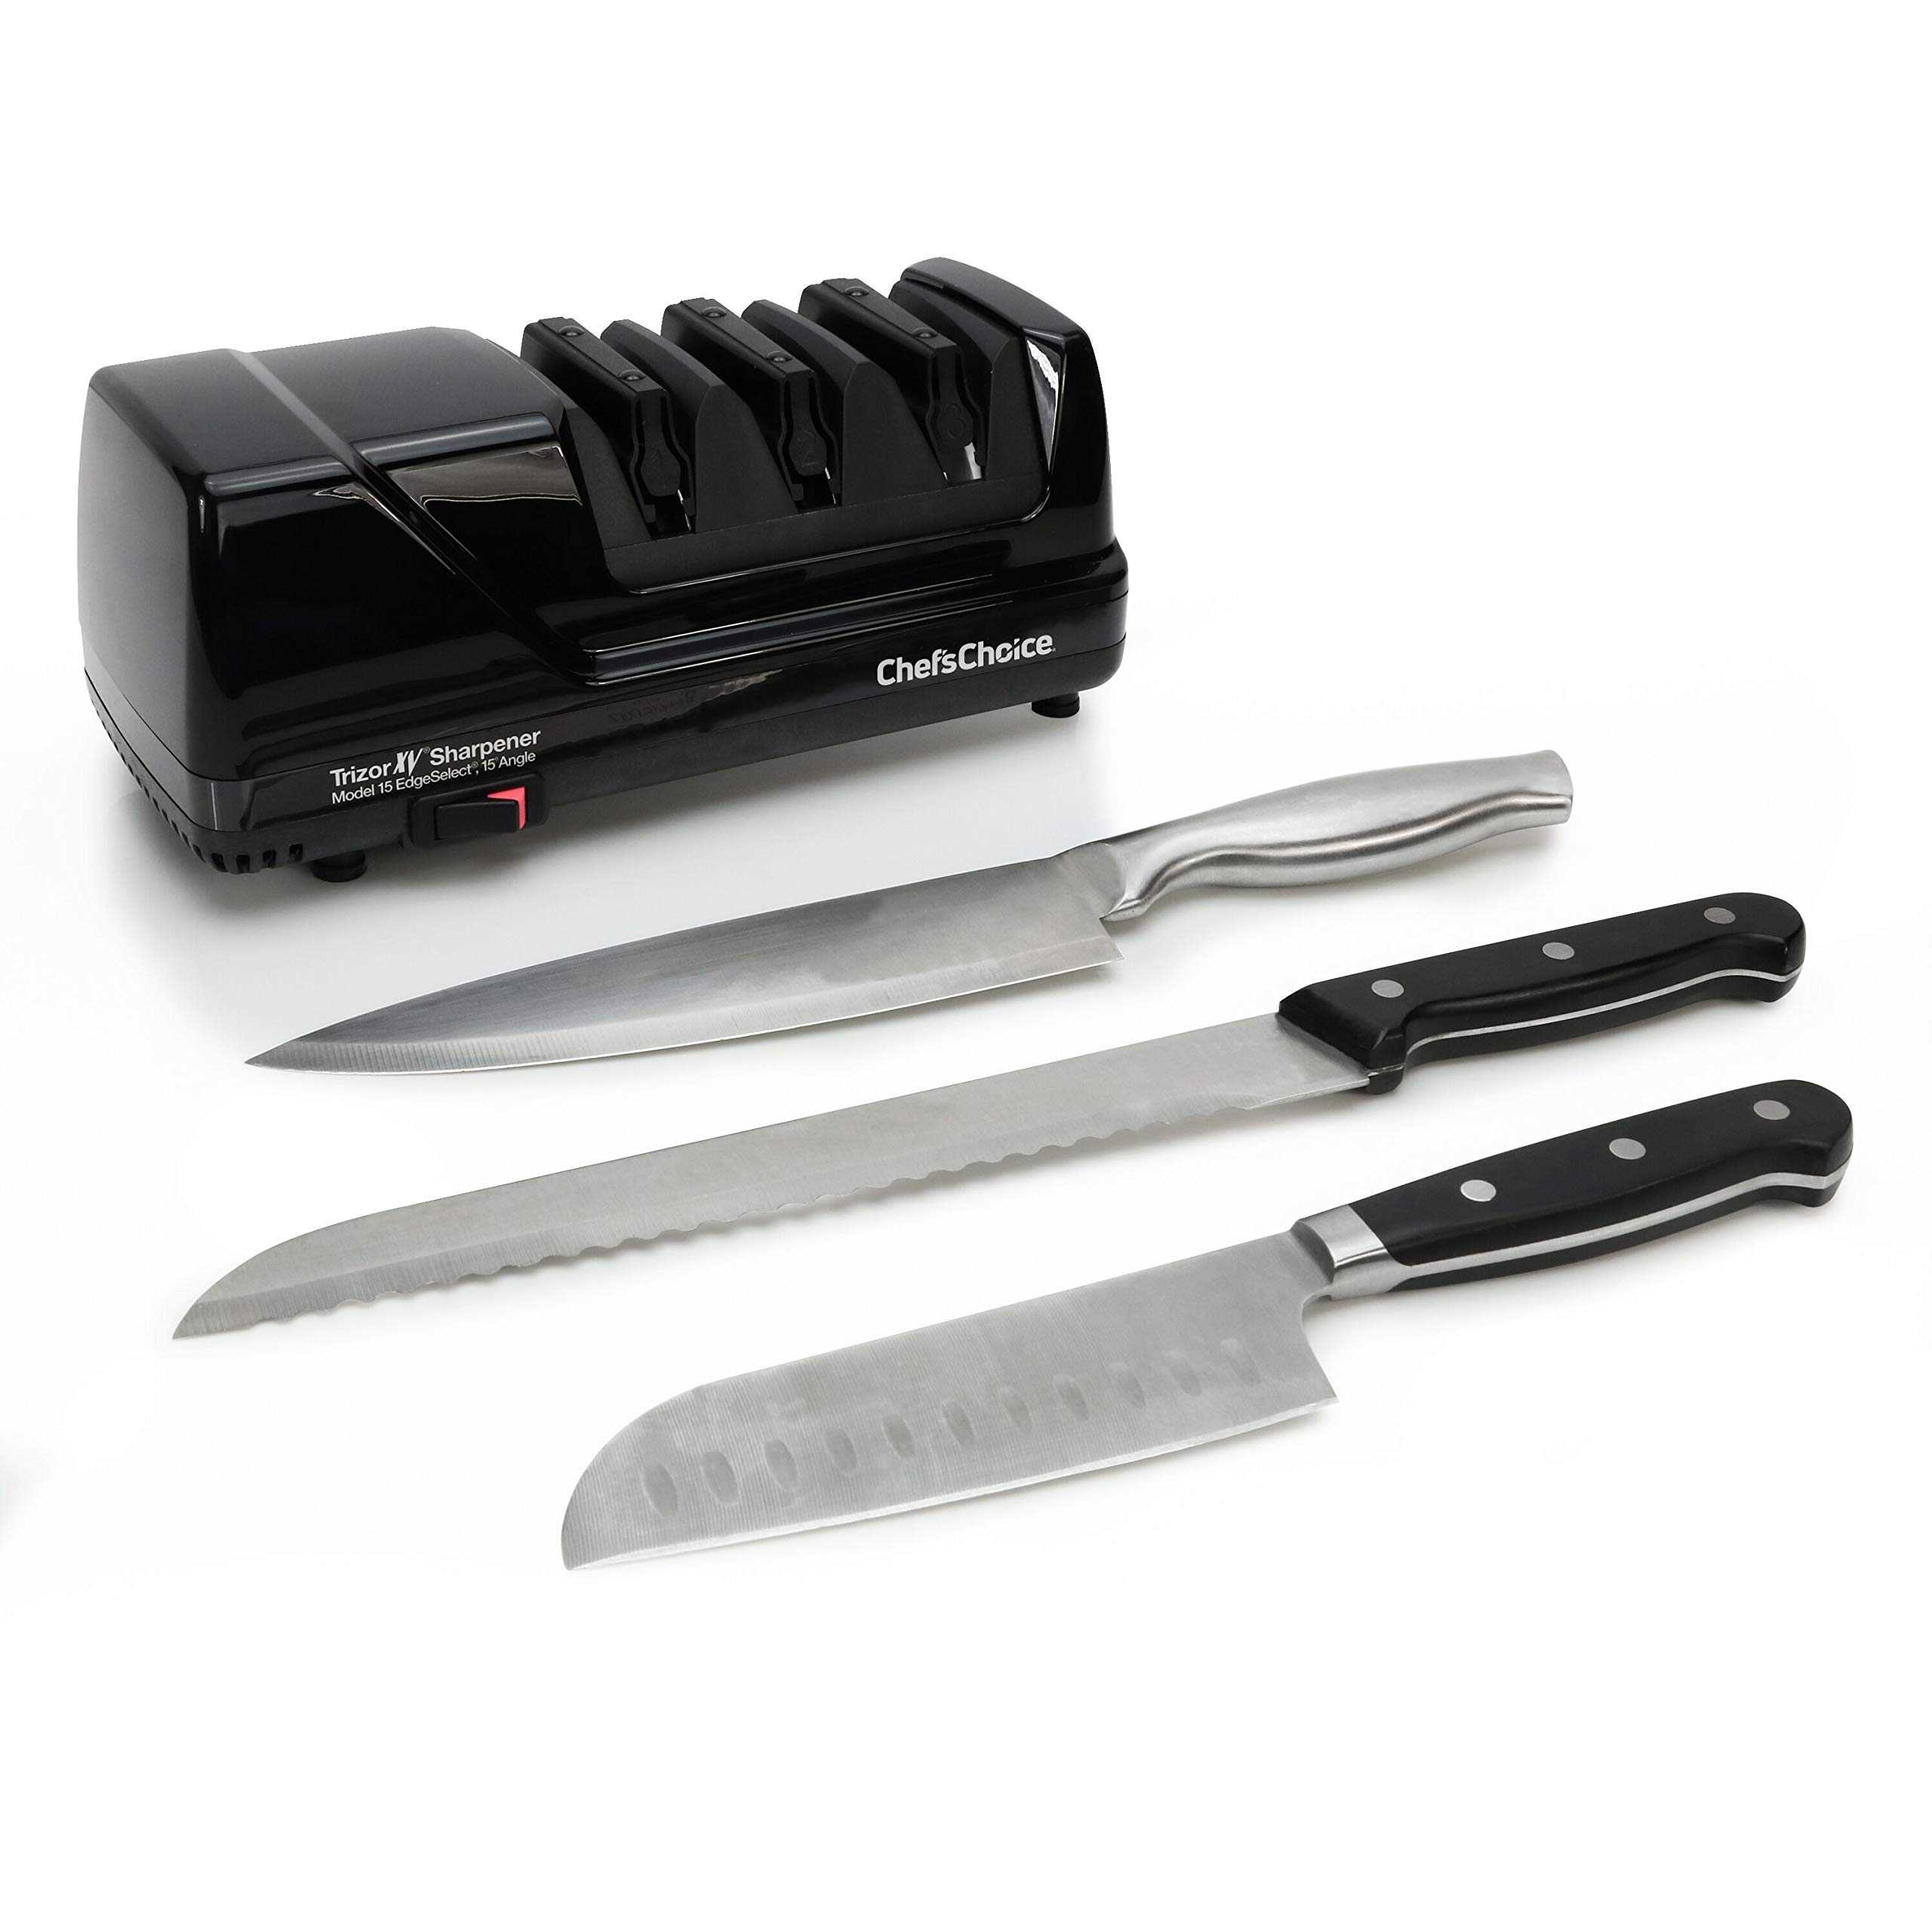 Chef'sChoice 15XV EdgeSelect Professional Electric Knife Straight and Serrated Knives Diamond Abrasives Patented Sharpening System, 3-Stage, Black